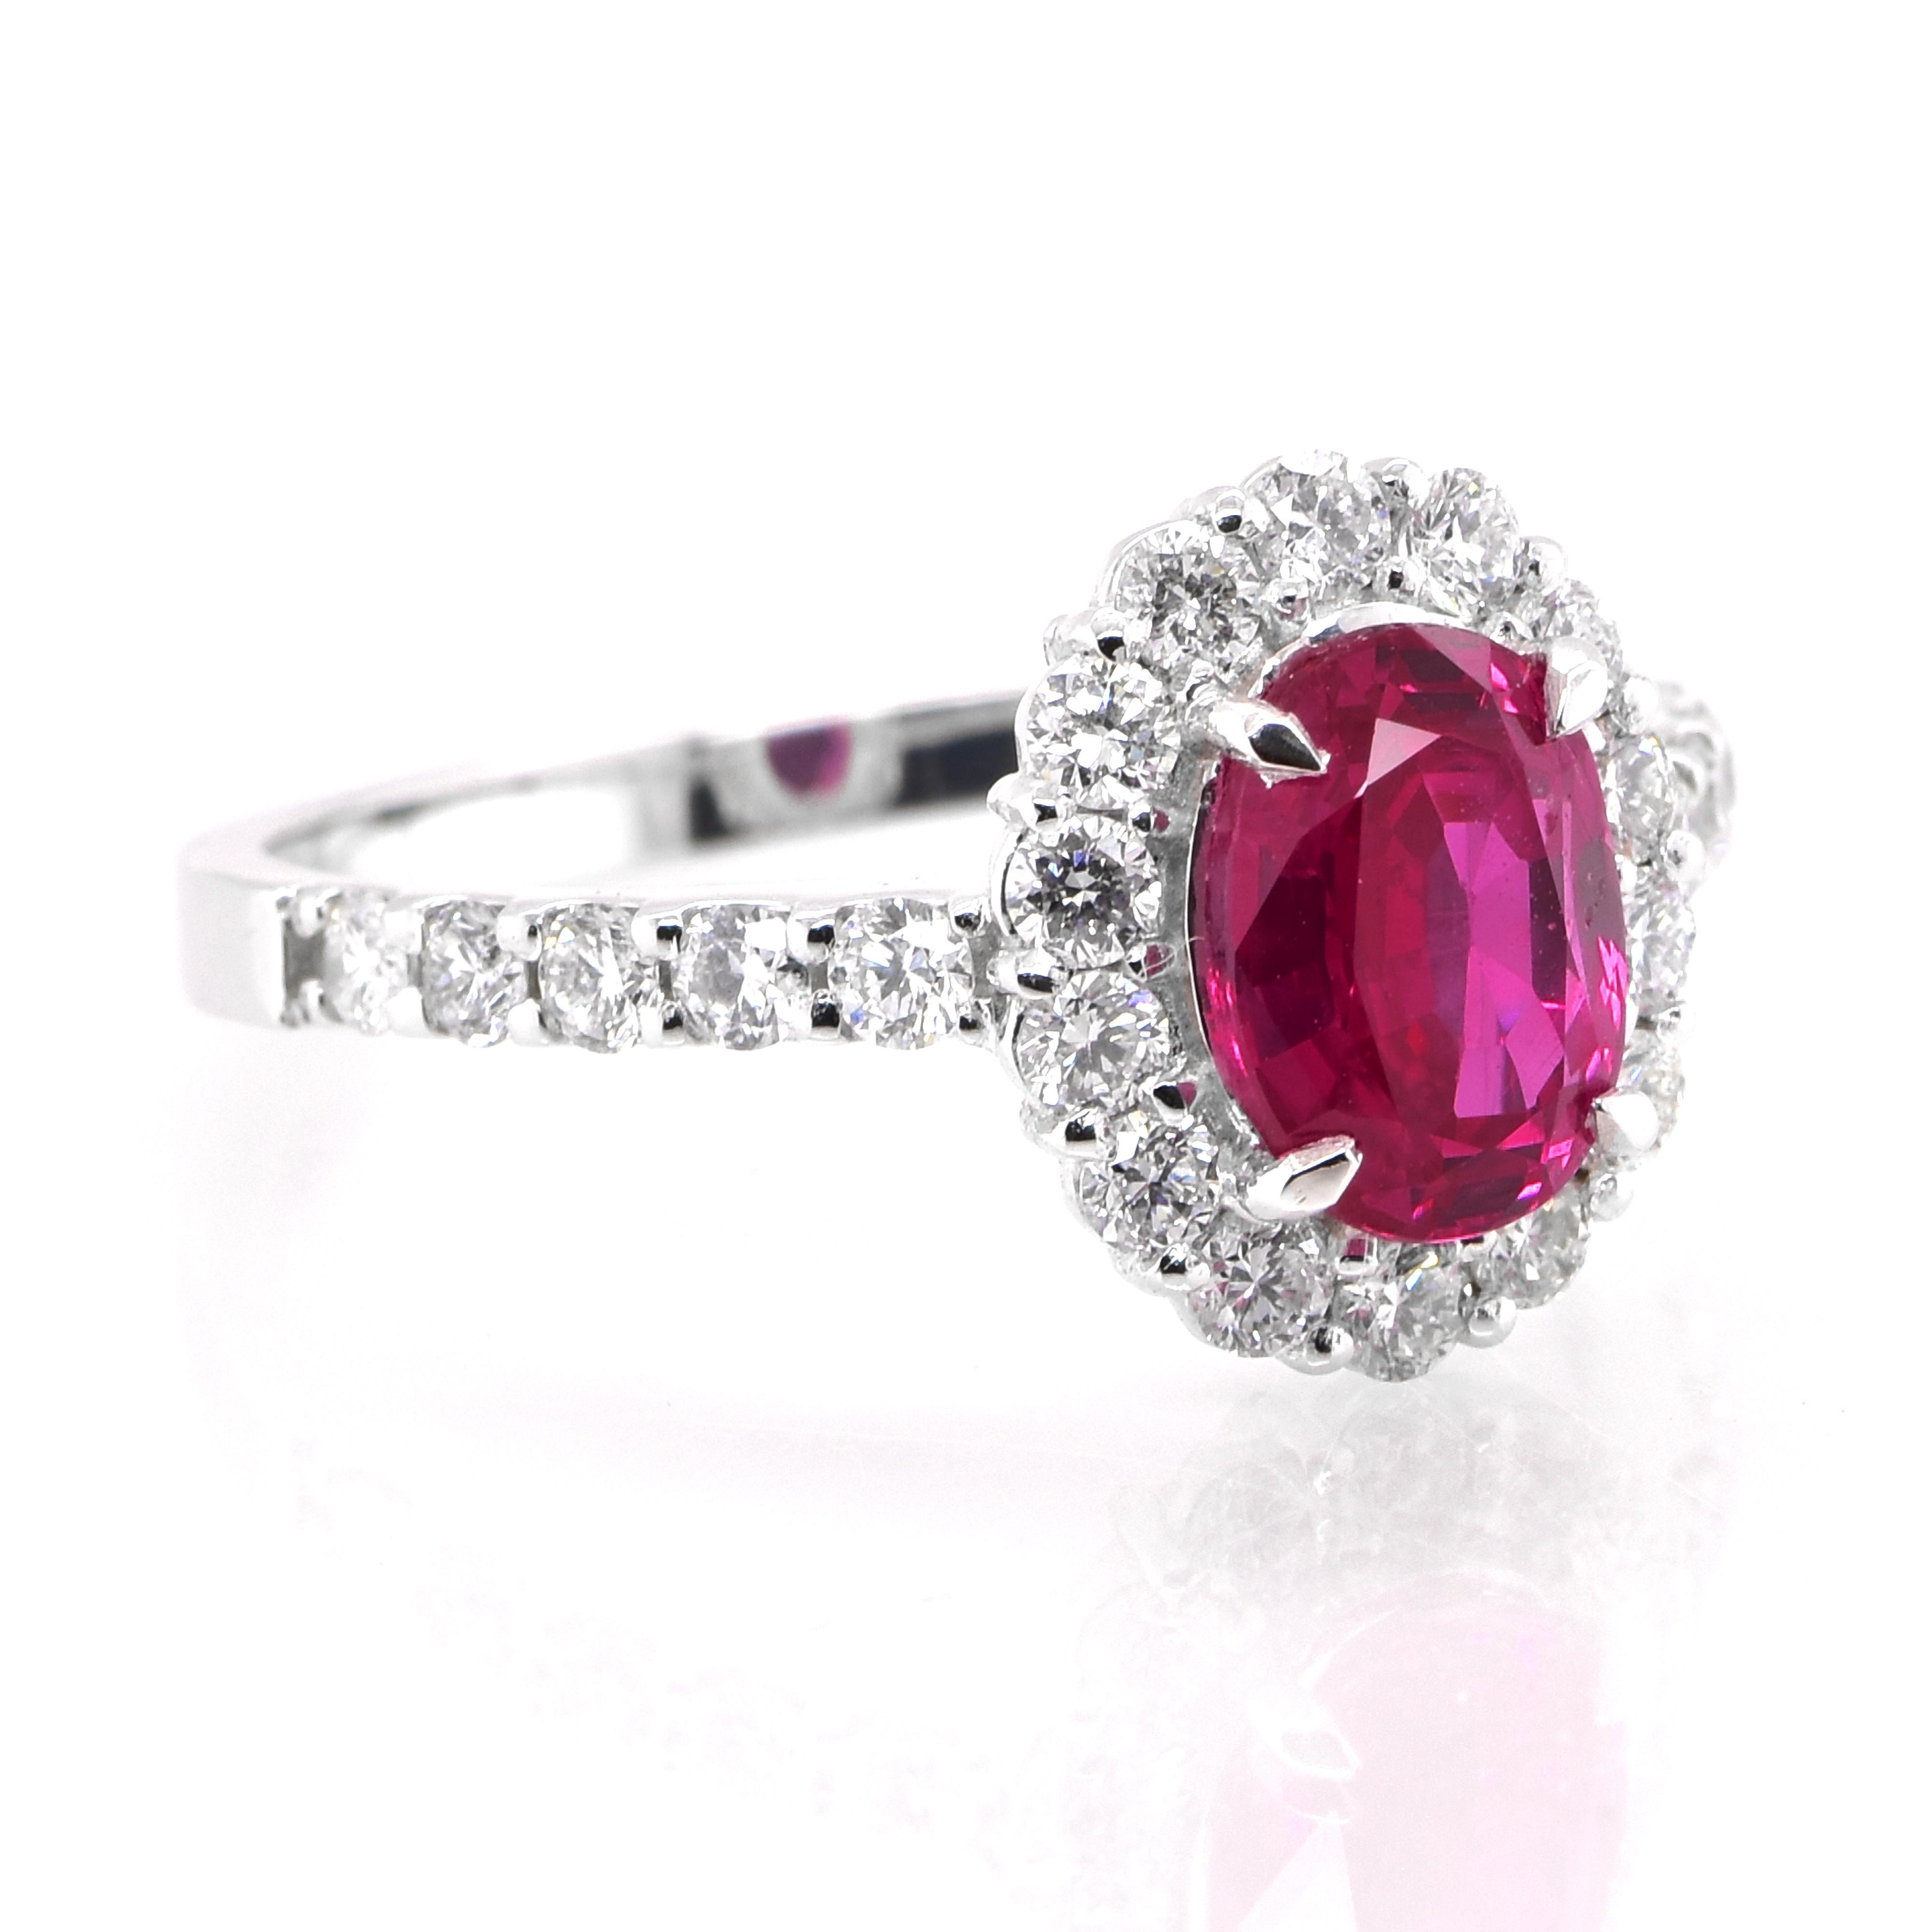 A beautiful Ring set in Platinum featuring a GIA Certified 1.58 Carat Natural Burmese, Untreated (Unheated) Ruby and 0.62 Carat Diamonds. Rubies are referred to as 